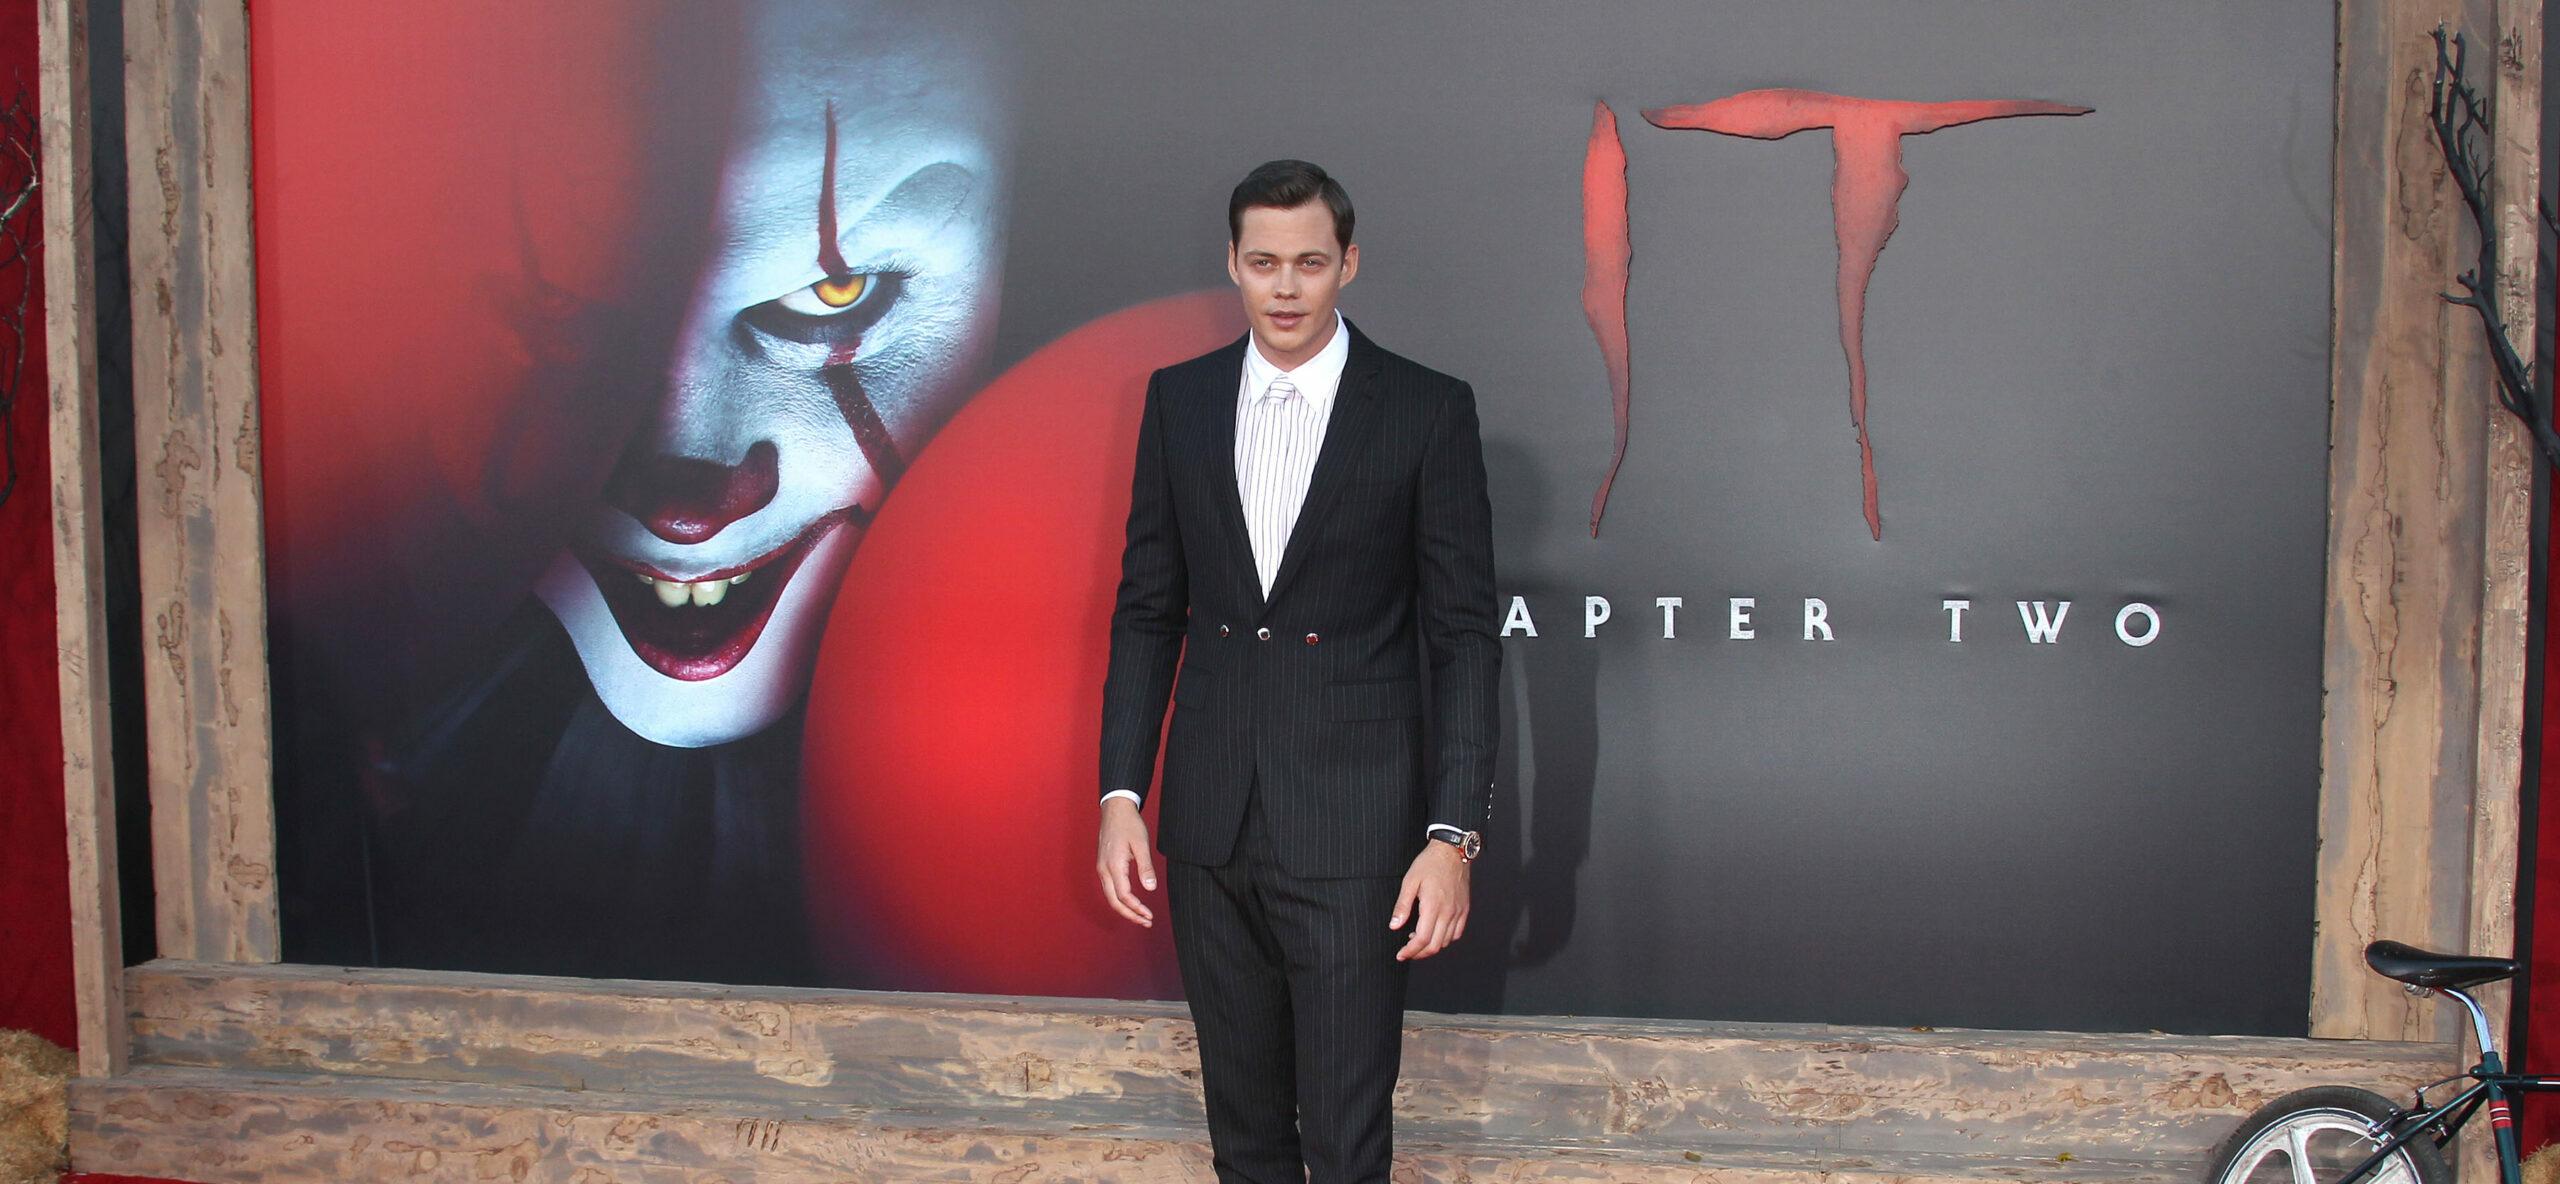 ‘IT’ Star Bill Skarsgard Busted With Drugs In Sweden